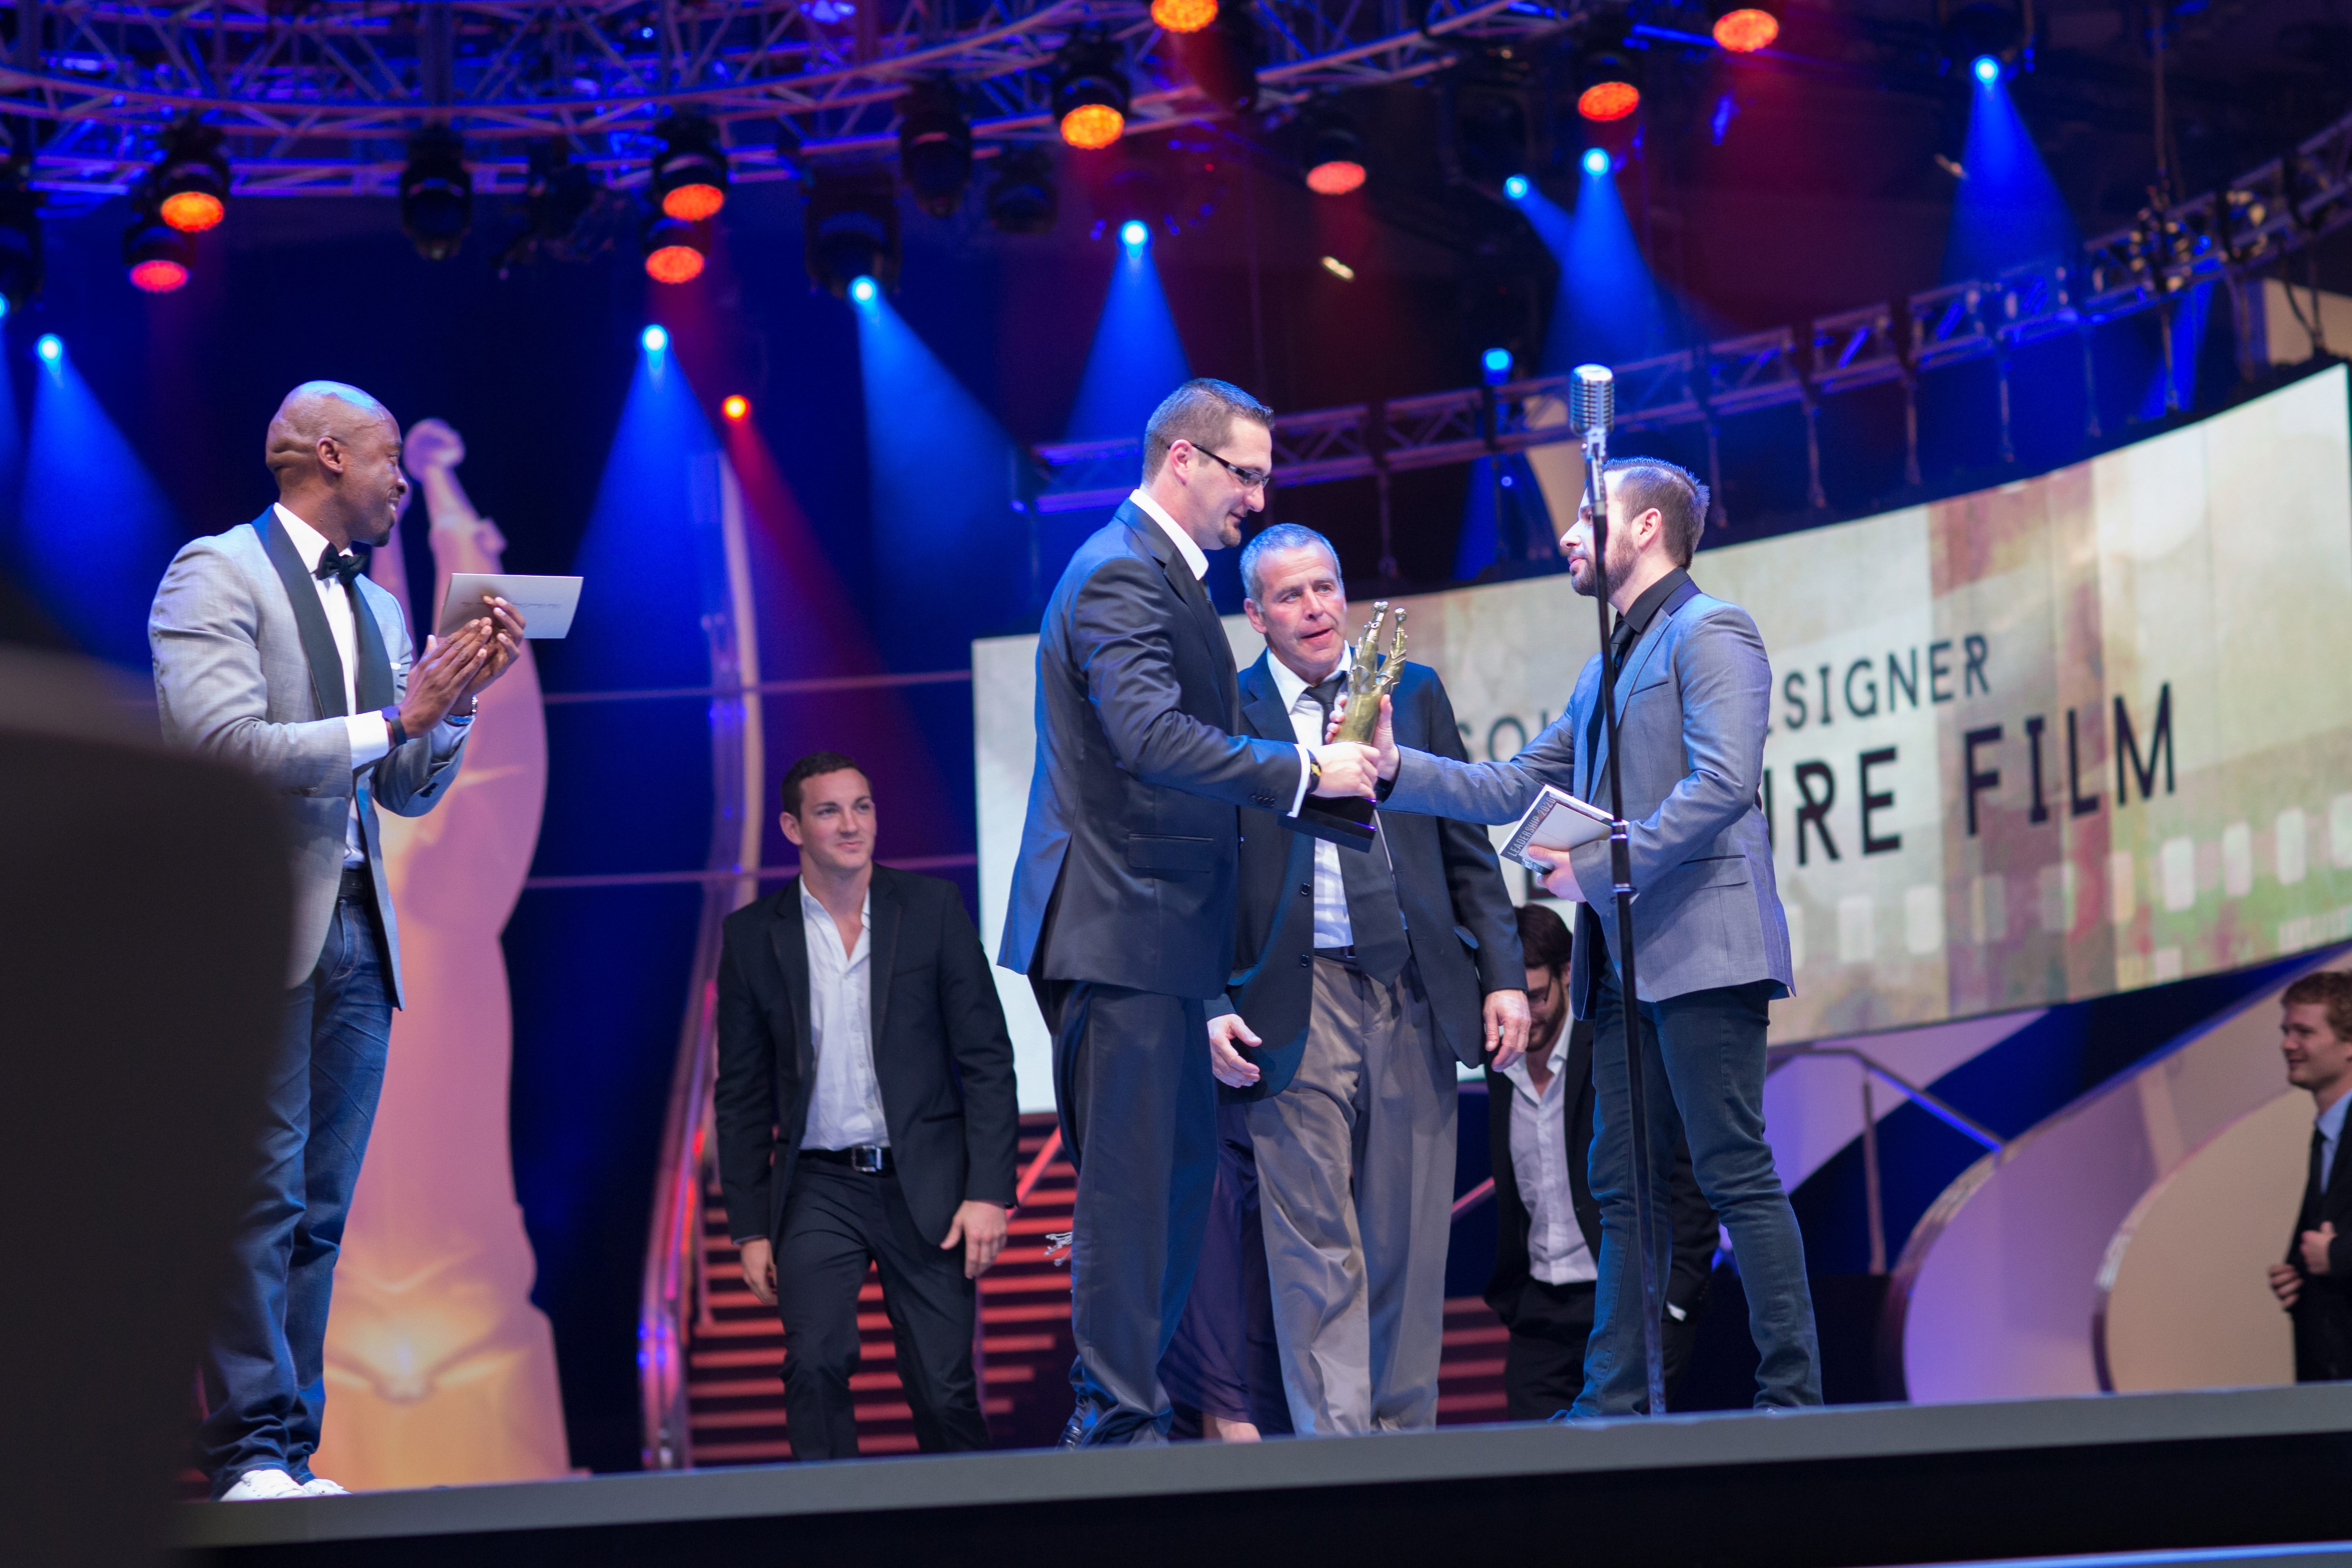 Jim Petrak taking the award for Best Sound Designer at the 2014 South African Film and Television Awards